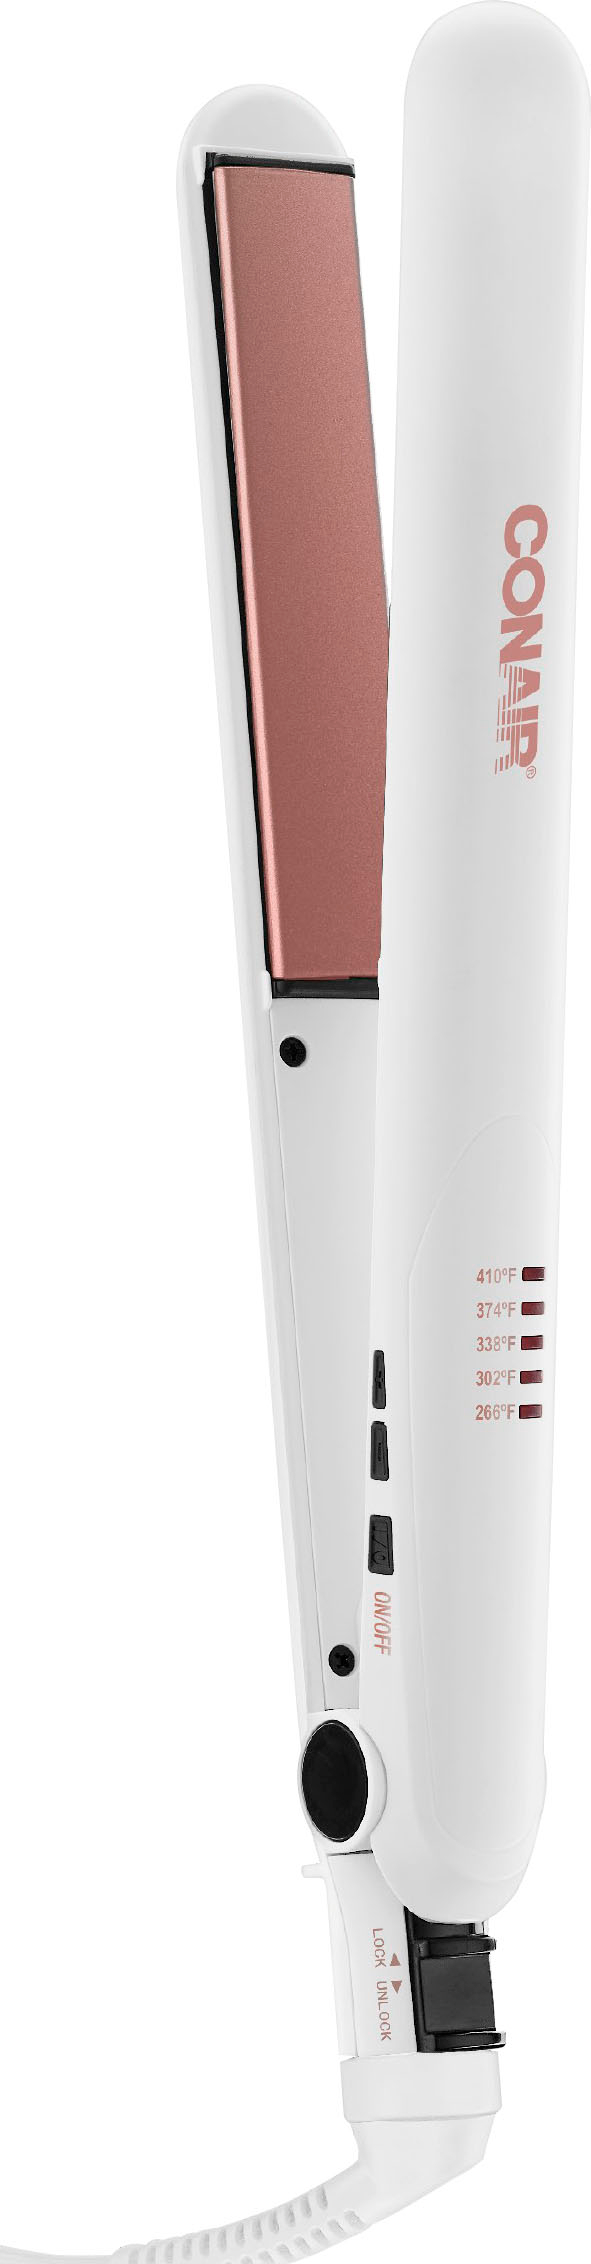 Angle View: Conair - Double Ceramic 1" Flat iron - Rose Gold